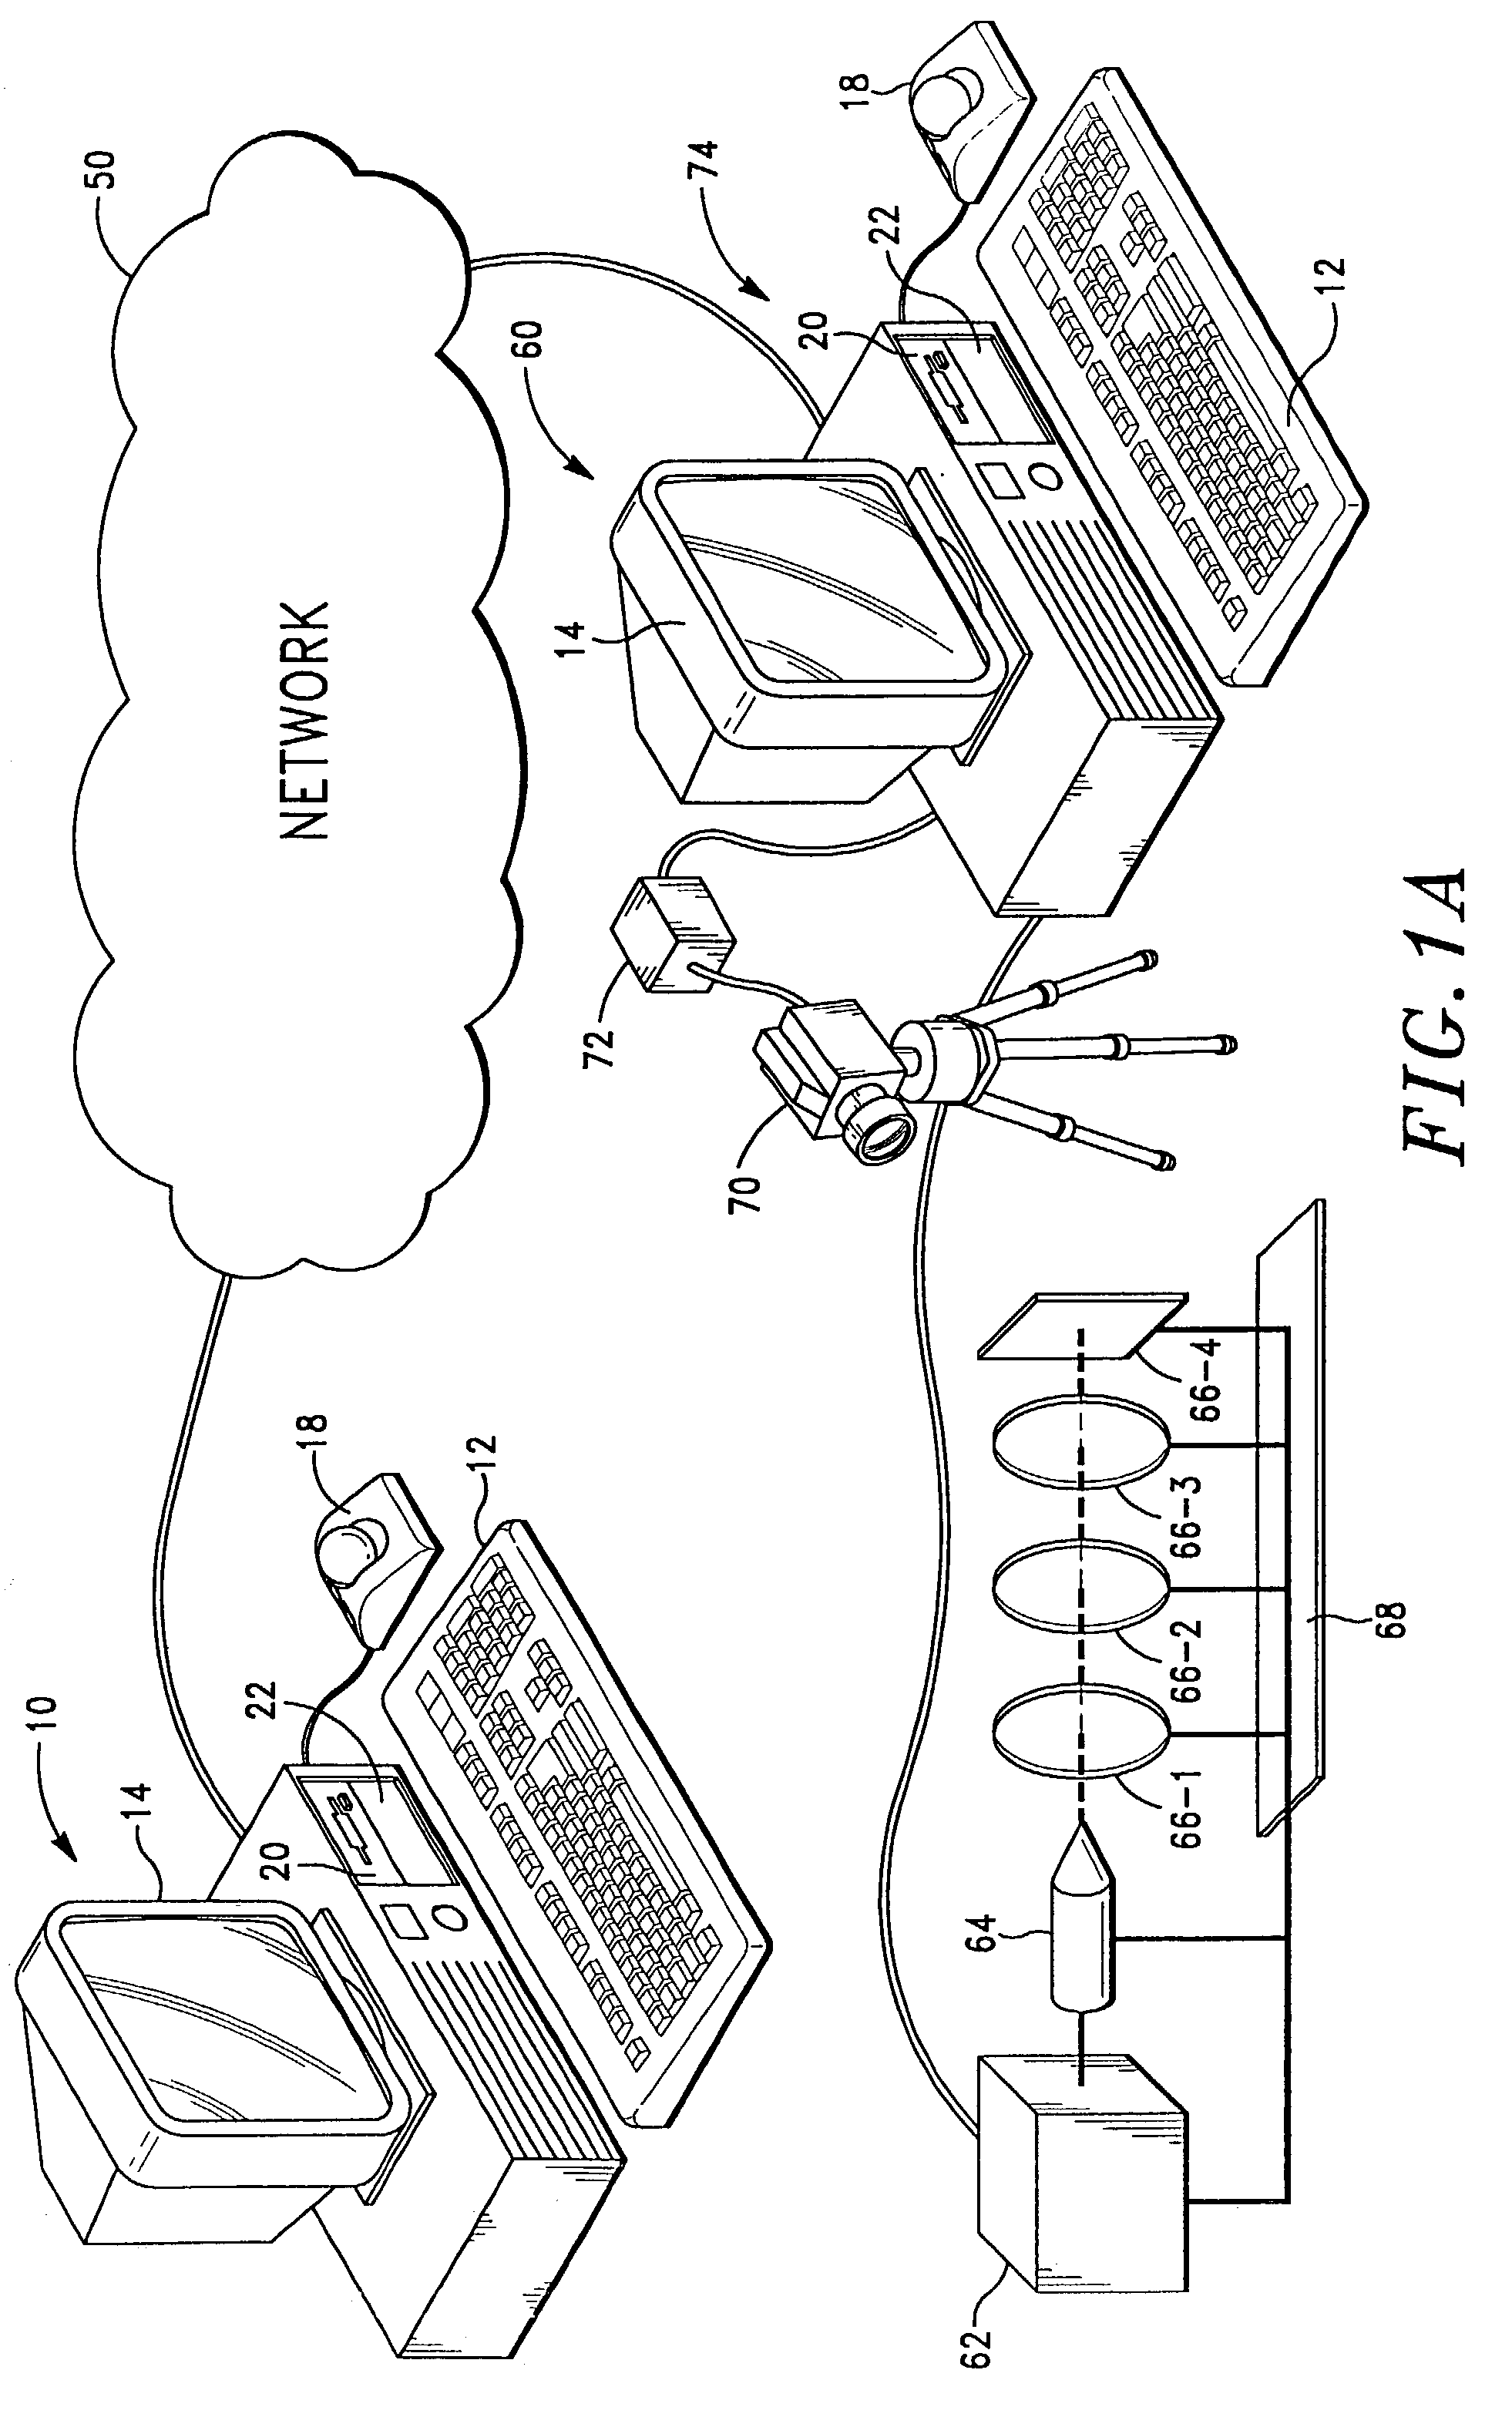 Control and observation of physical devices, equipment and processes by multiple users over computer networks